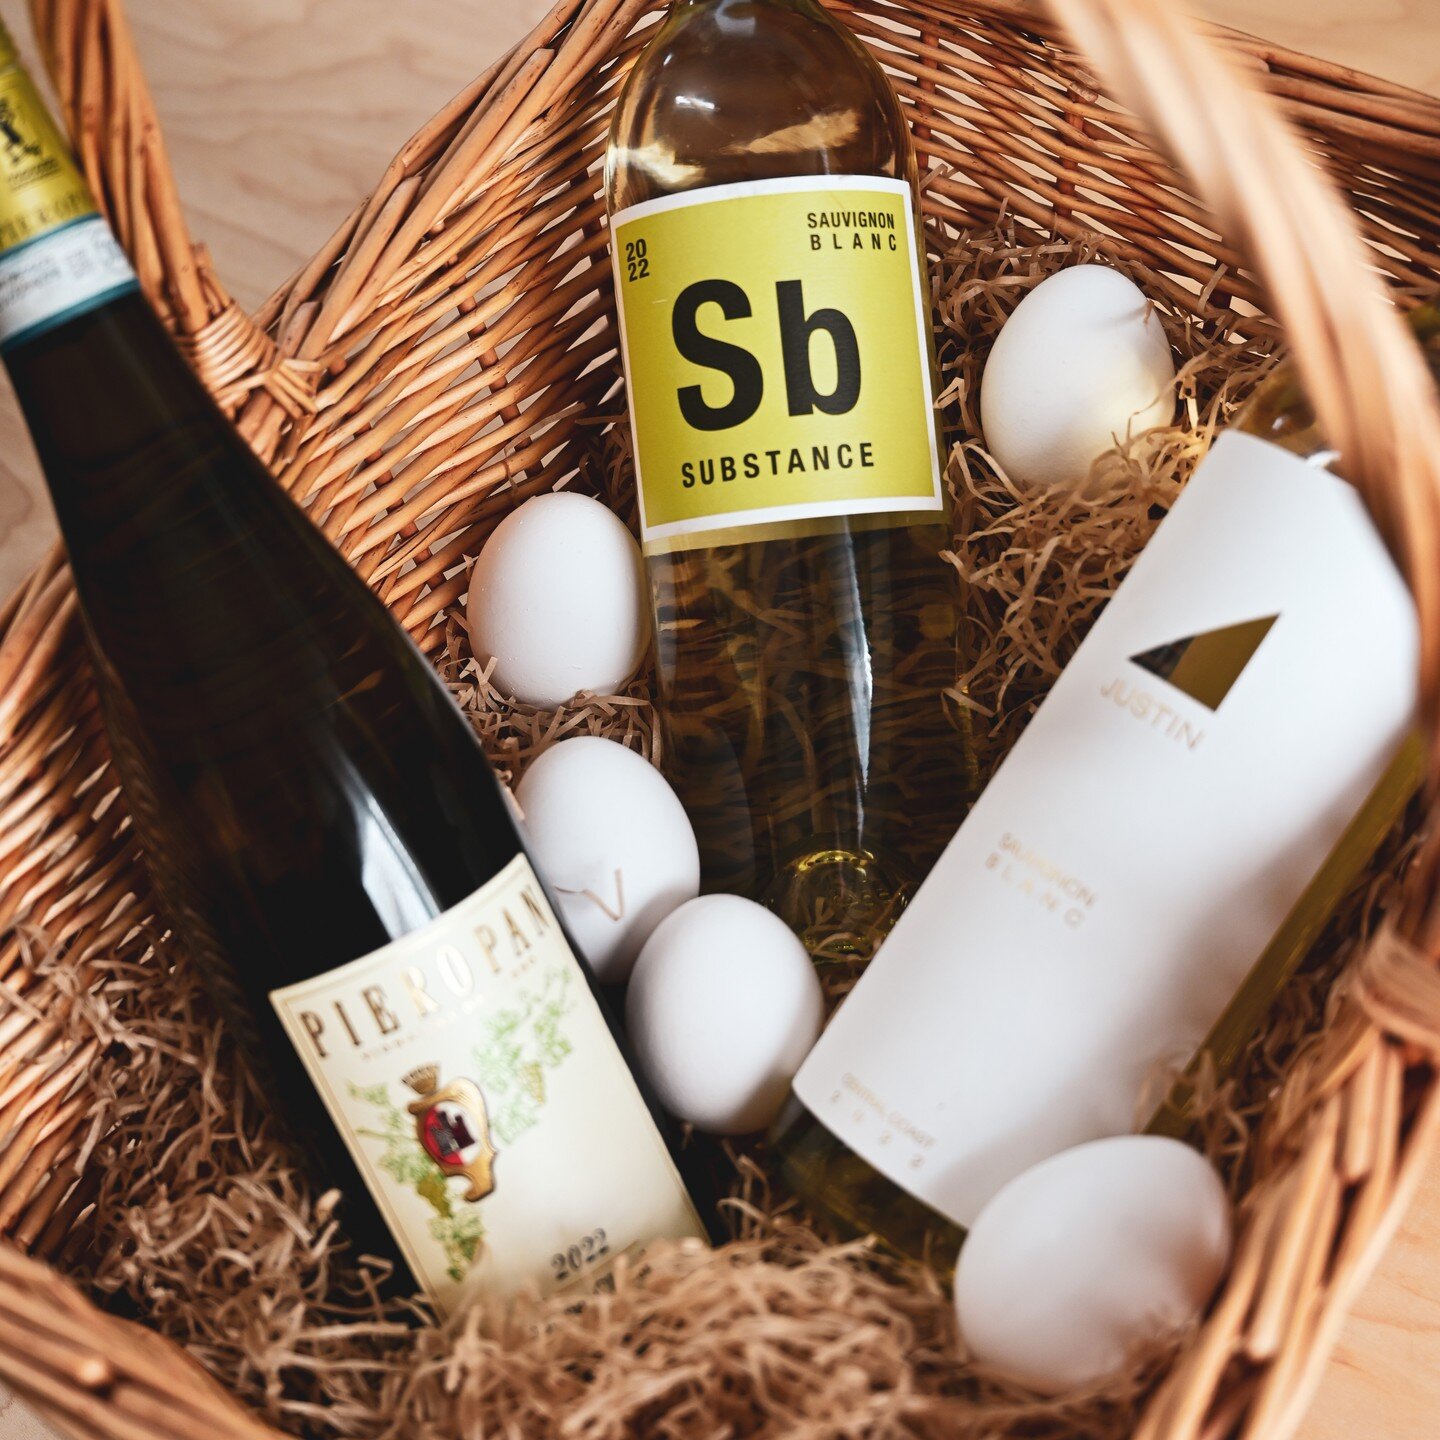 What Easter Basket is complete without something for the parents? Happy Easter everyone 🐰
.
.
.
#privateselection #EastMain #shoplocal #locallyowned #bozeman #wine #easter